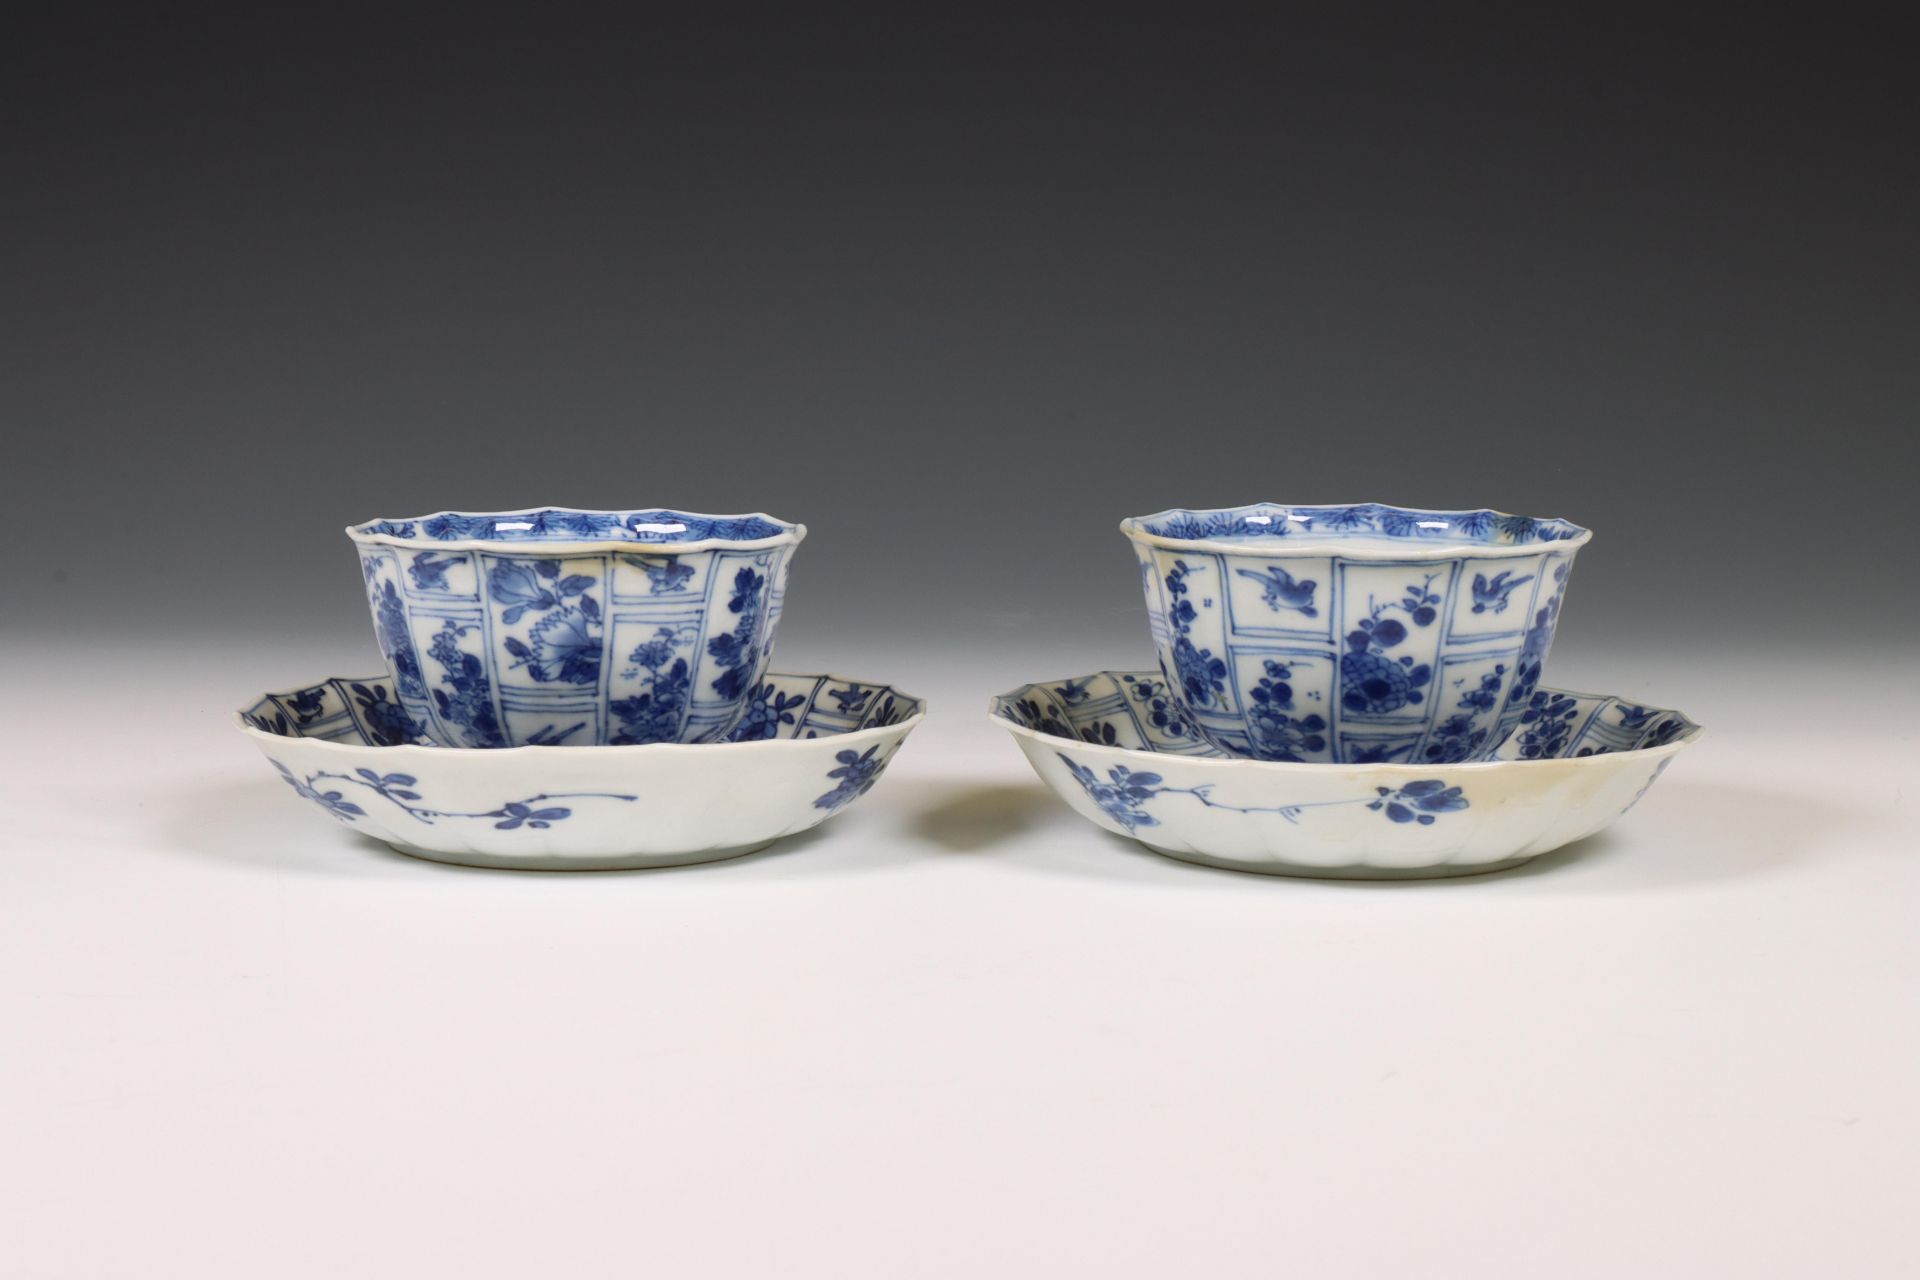 China, pair of blue and white porcelain cups and saucers, Kangxi period (1662-1722),